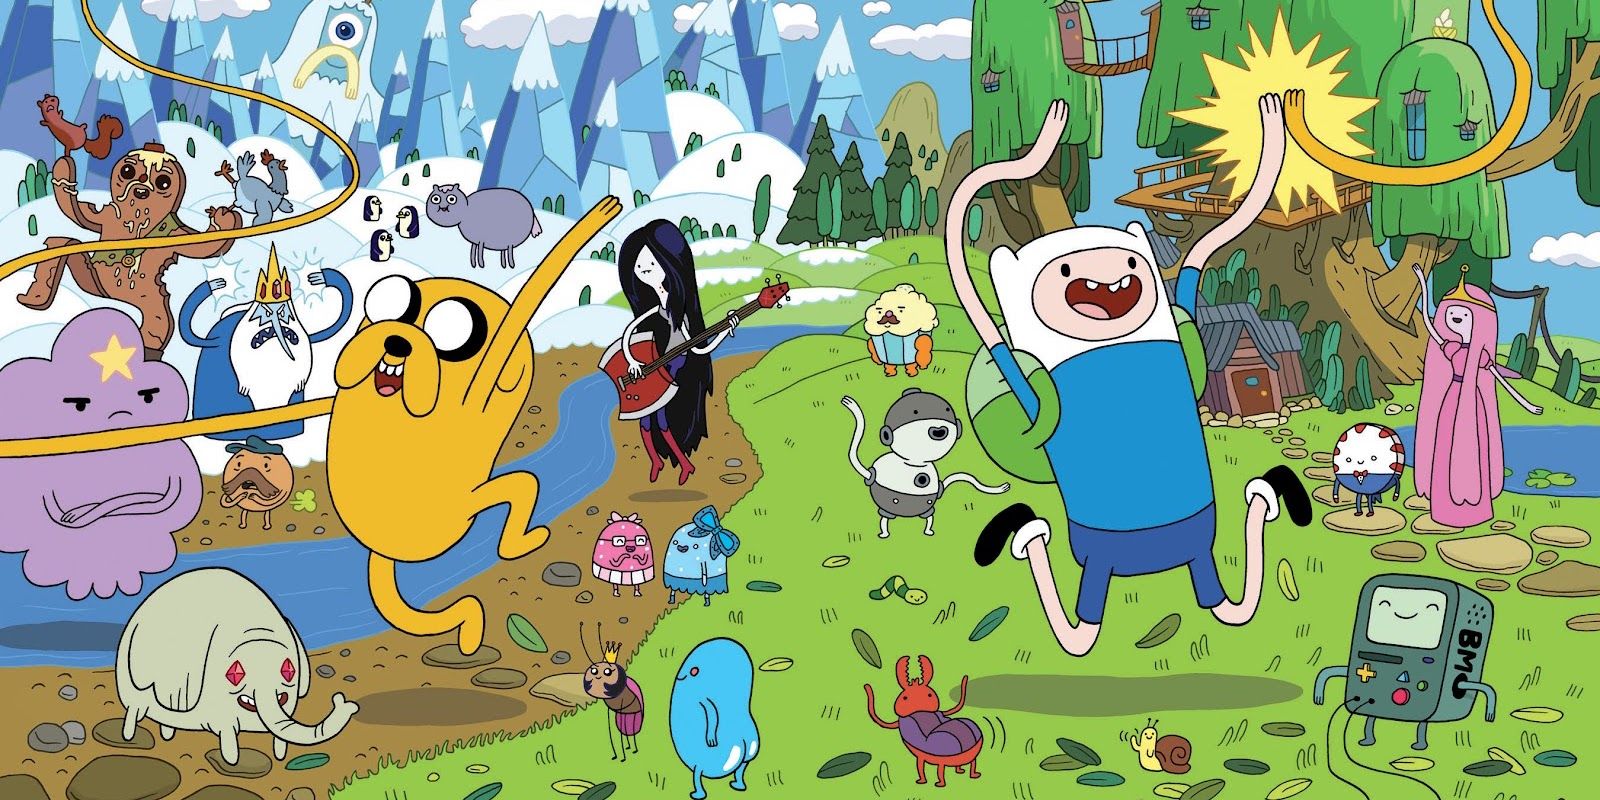 All the characters of Adventure Time cheering with Jake and Finn in the foreground.